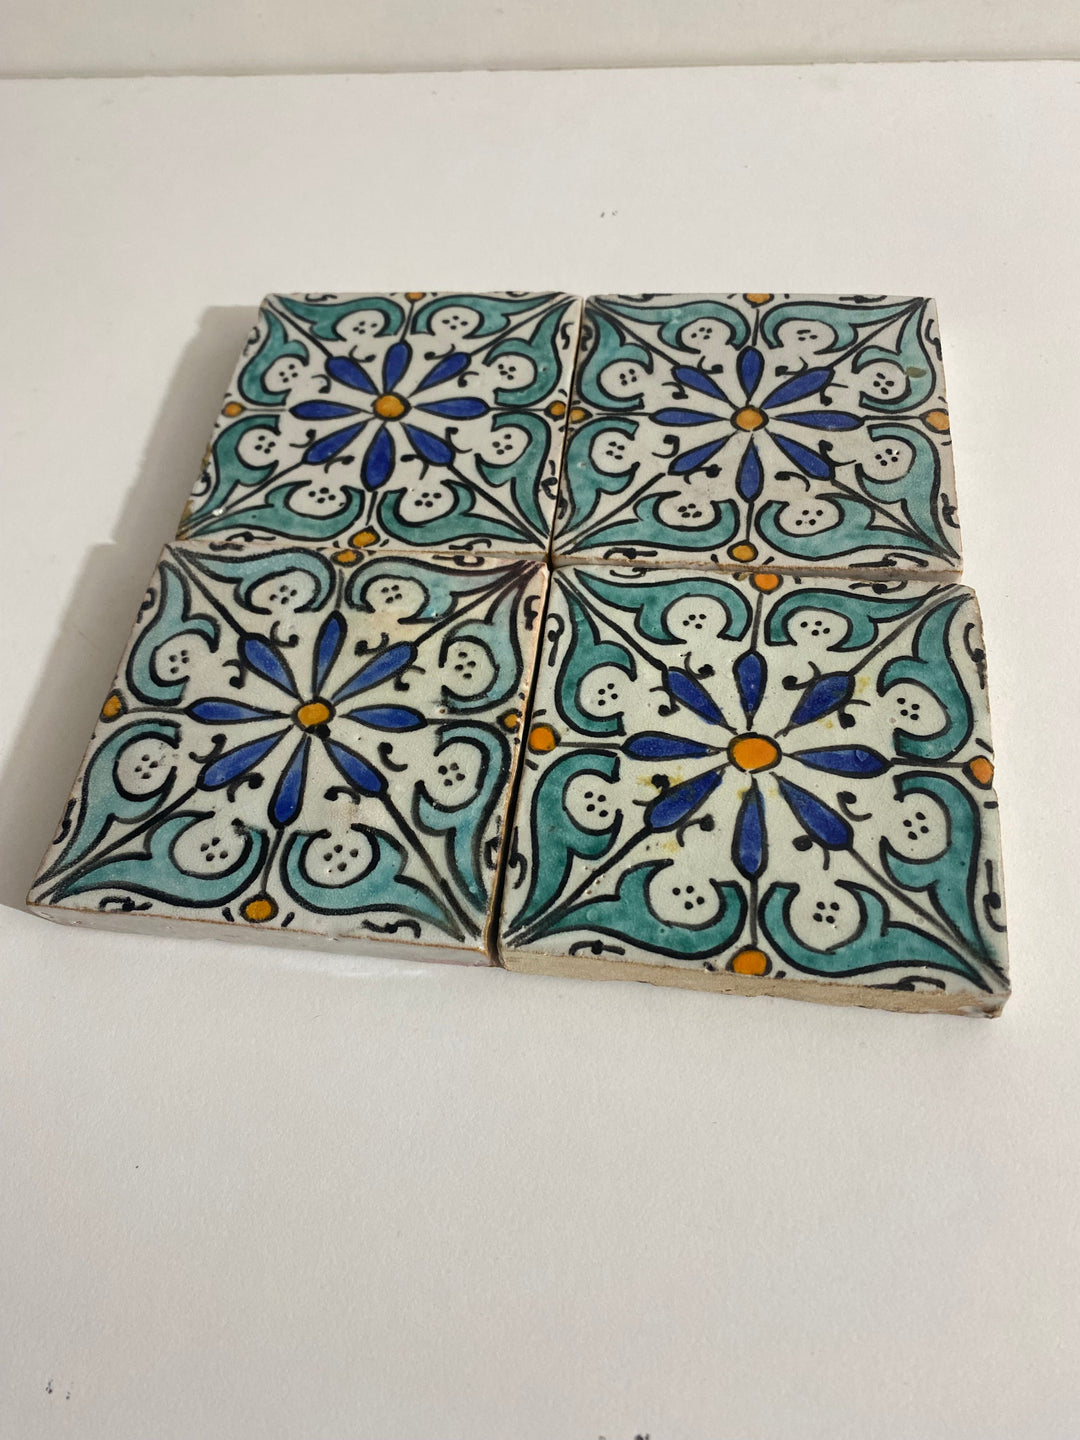 Bathroom and kitchen Ceramic tiles Hand painted tiles 4"x4" 100% for  Remodeling and Projects works wall and ground